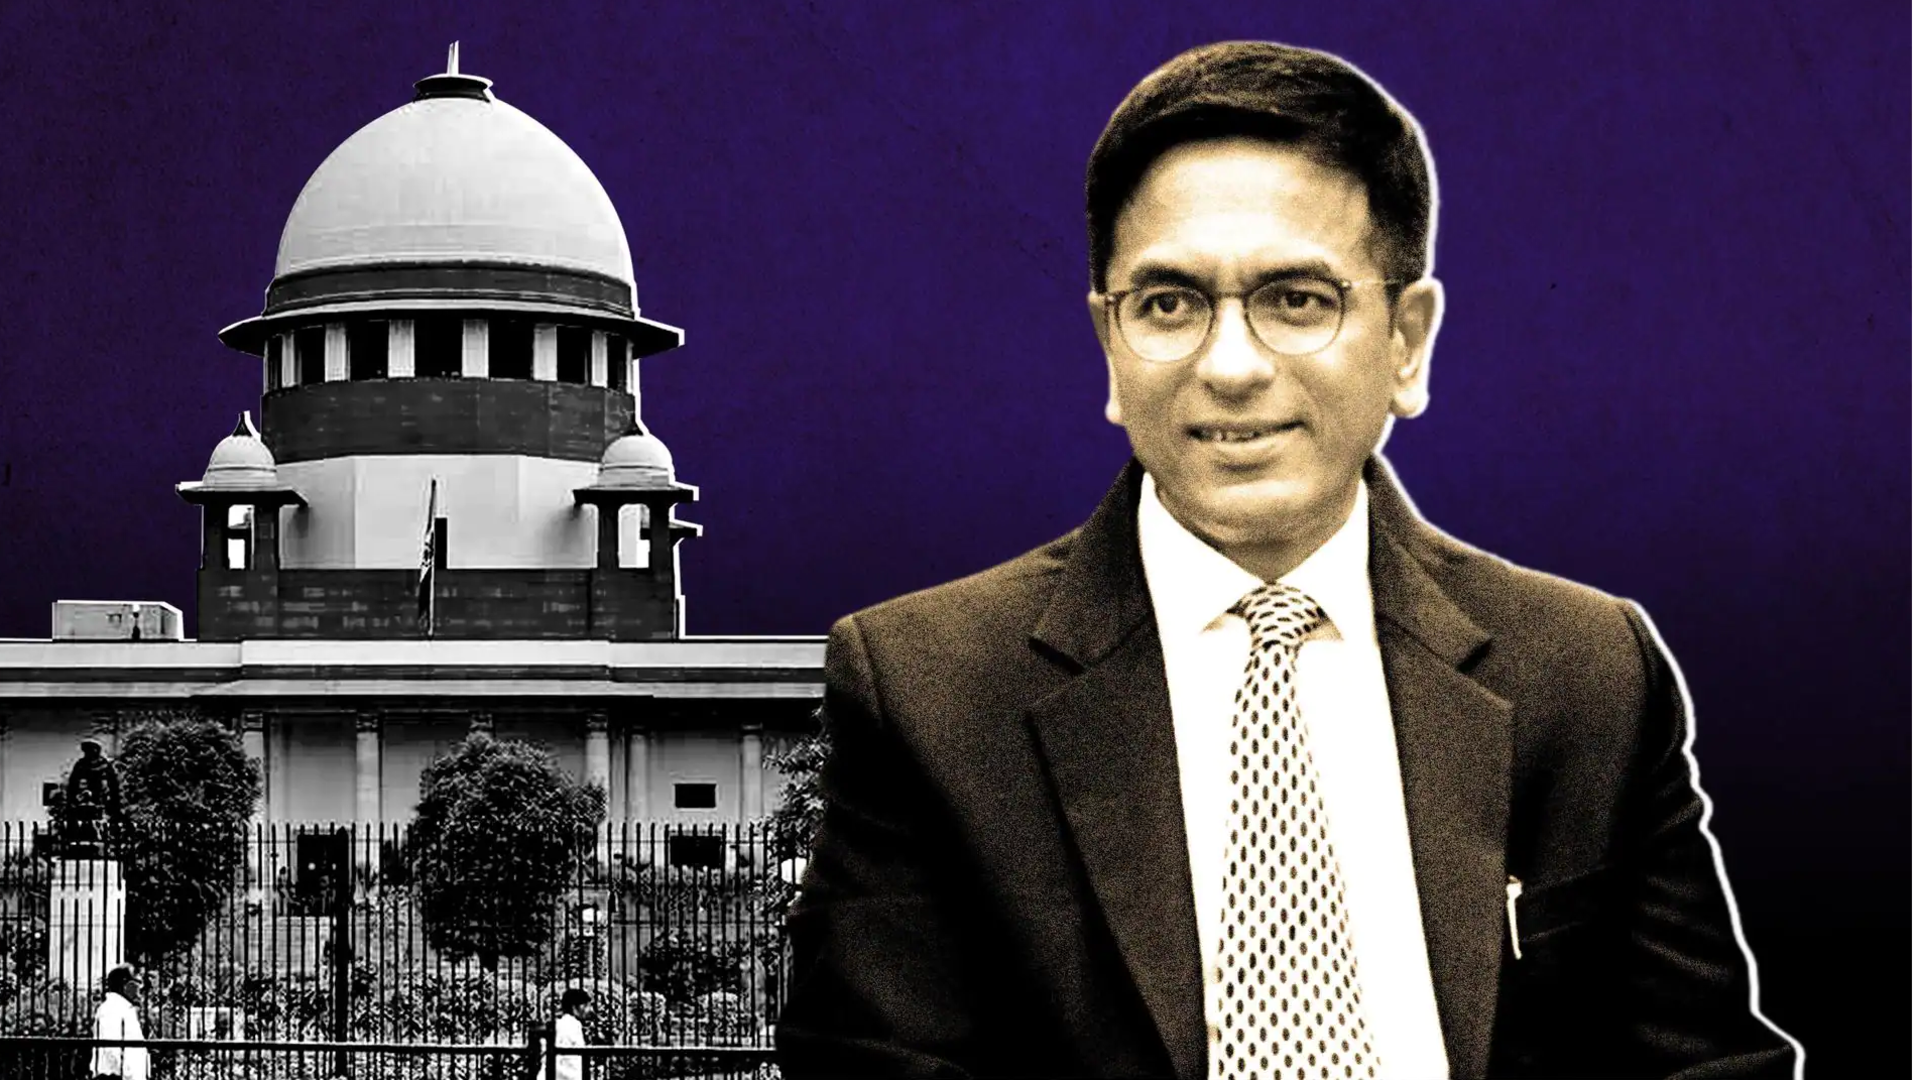 Fear of targeting makes judges reluctant to grant bail: CJI